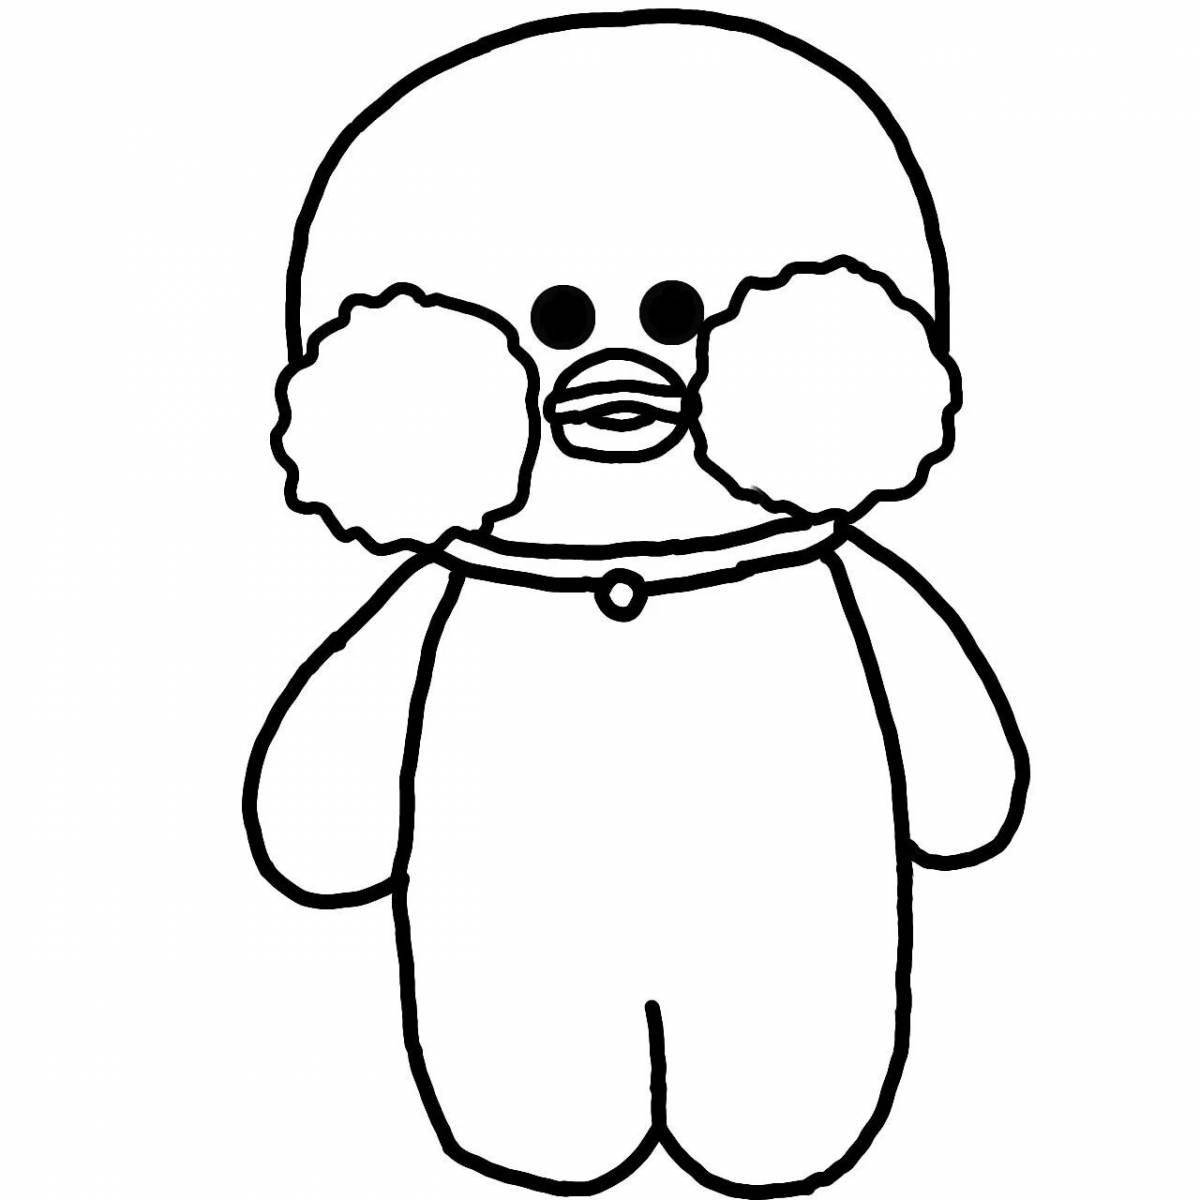 Colorful lalafan duck coloring page